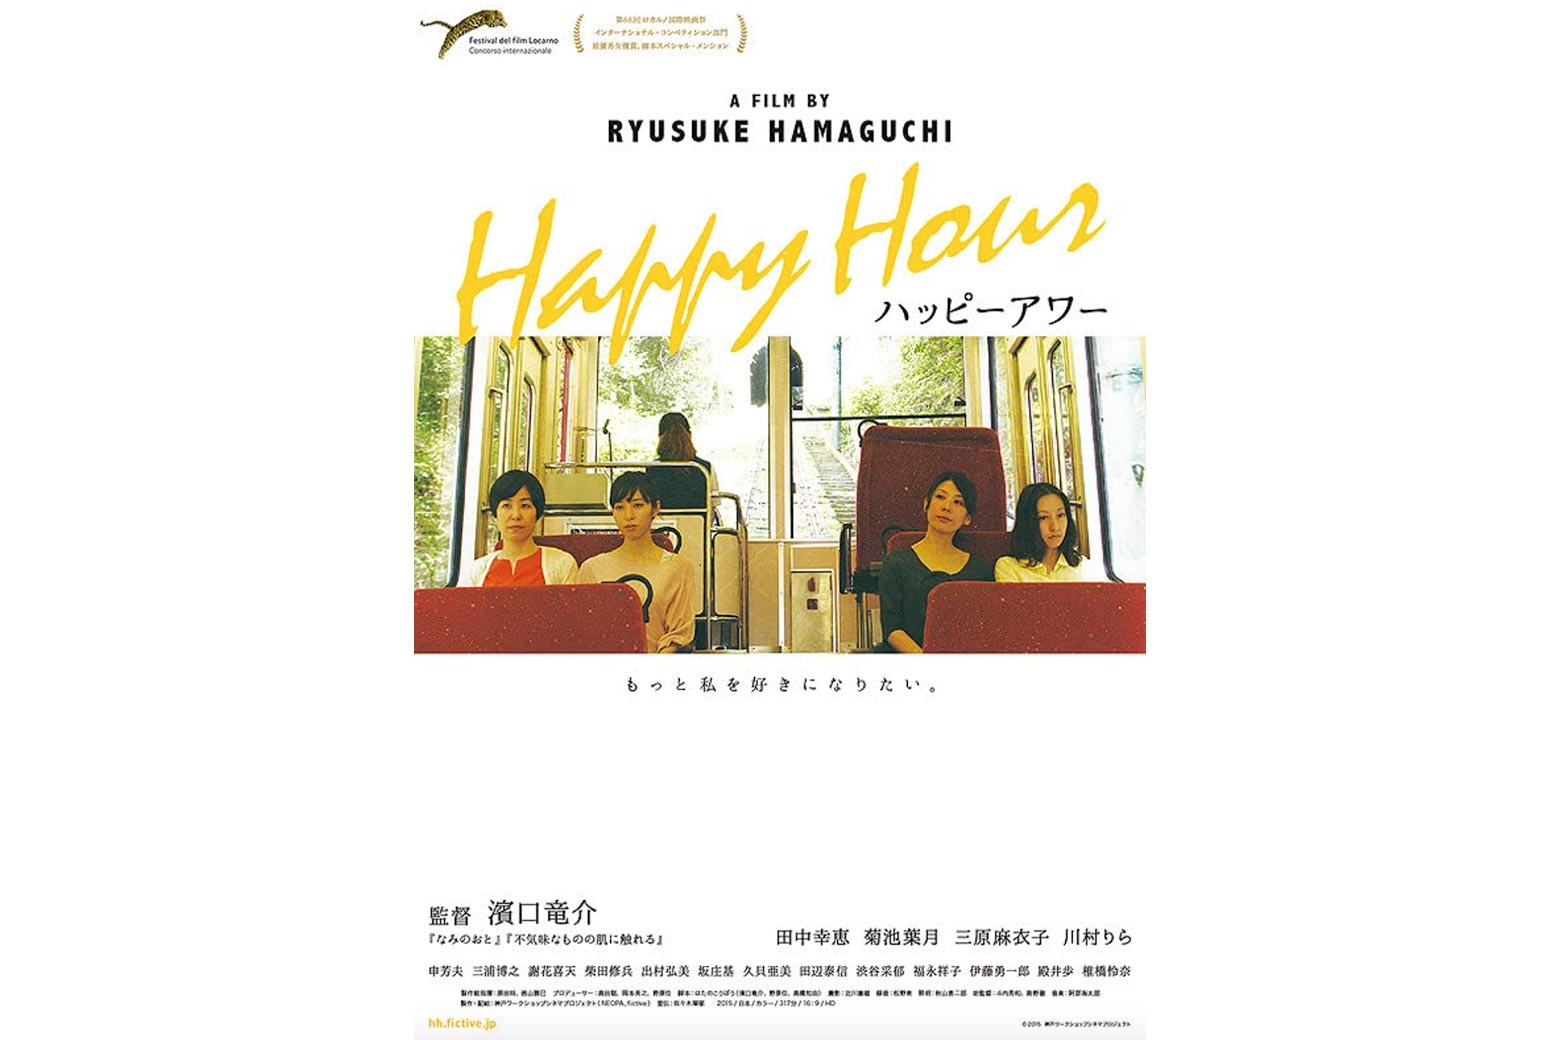 Happy Hour poster